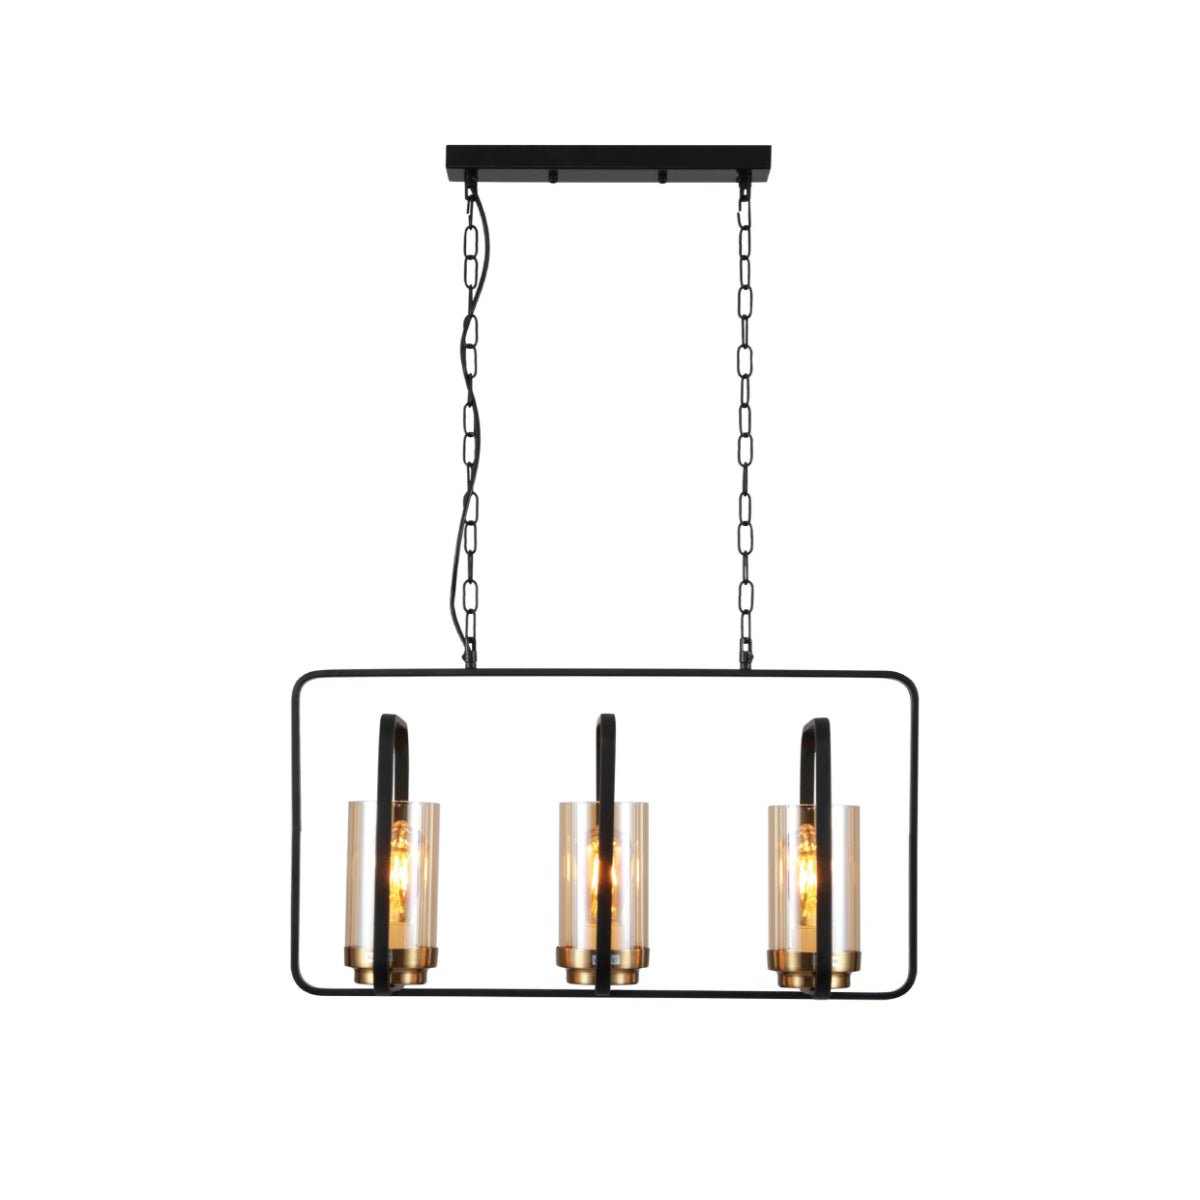 Main image of Black Metal Cage Body Amber Cylinder Glass Kitchen Island Chandelier Ceiling Light with 3xE27 Fitting | TEKLED 159-17442